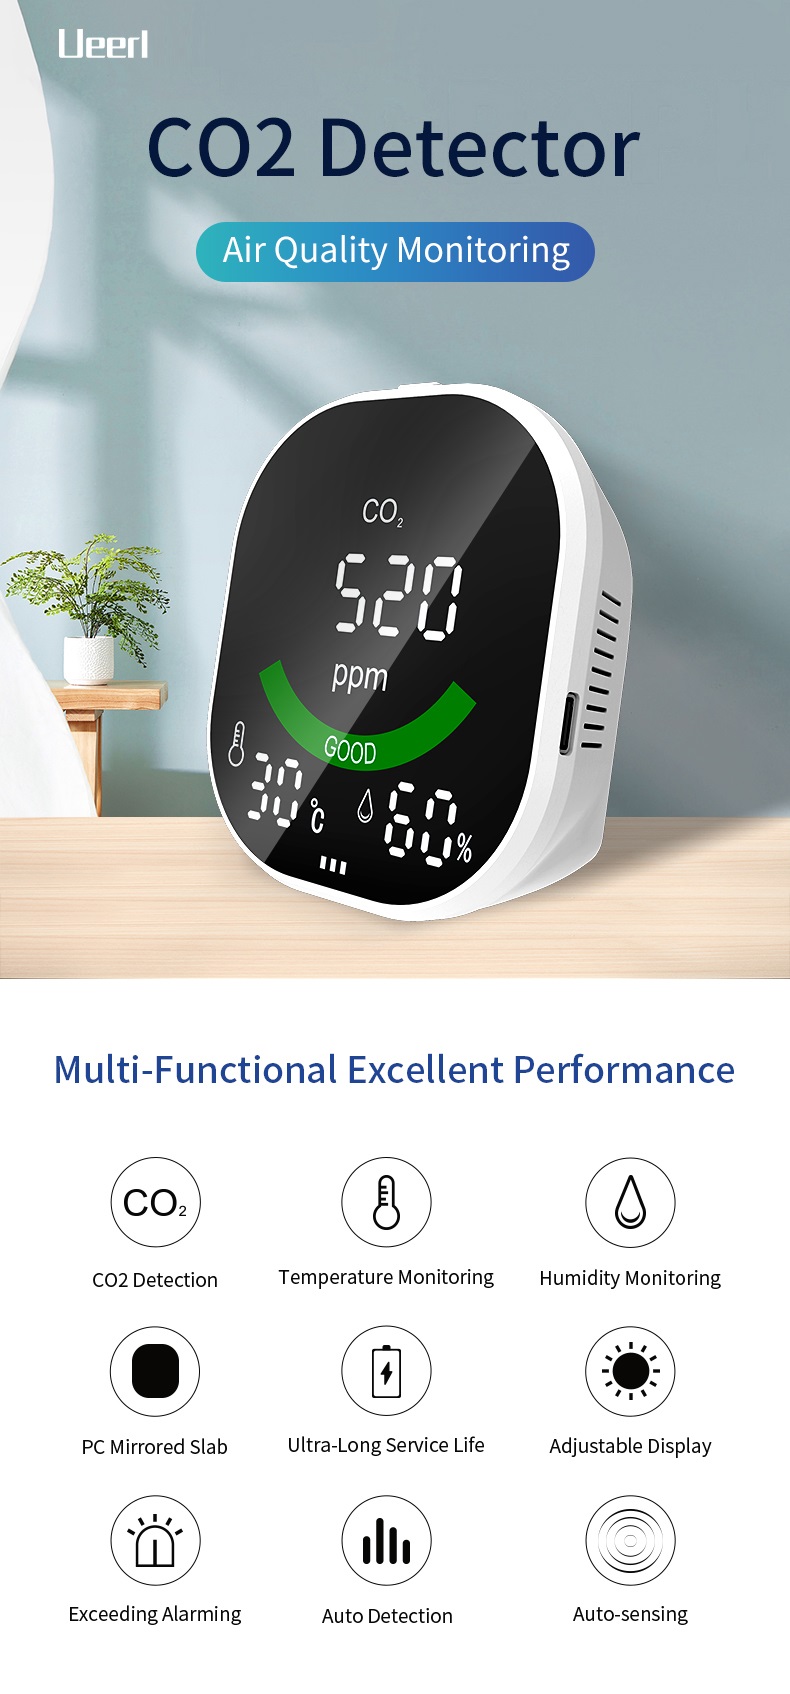 CO2-3-Digital-Carbon-Dioxide-Detector-Indoor-Air-Quality-Detection-Temperature-and-Humidity-Sensor-T-1872311-1